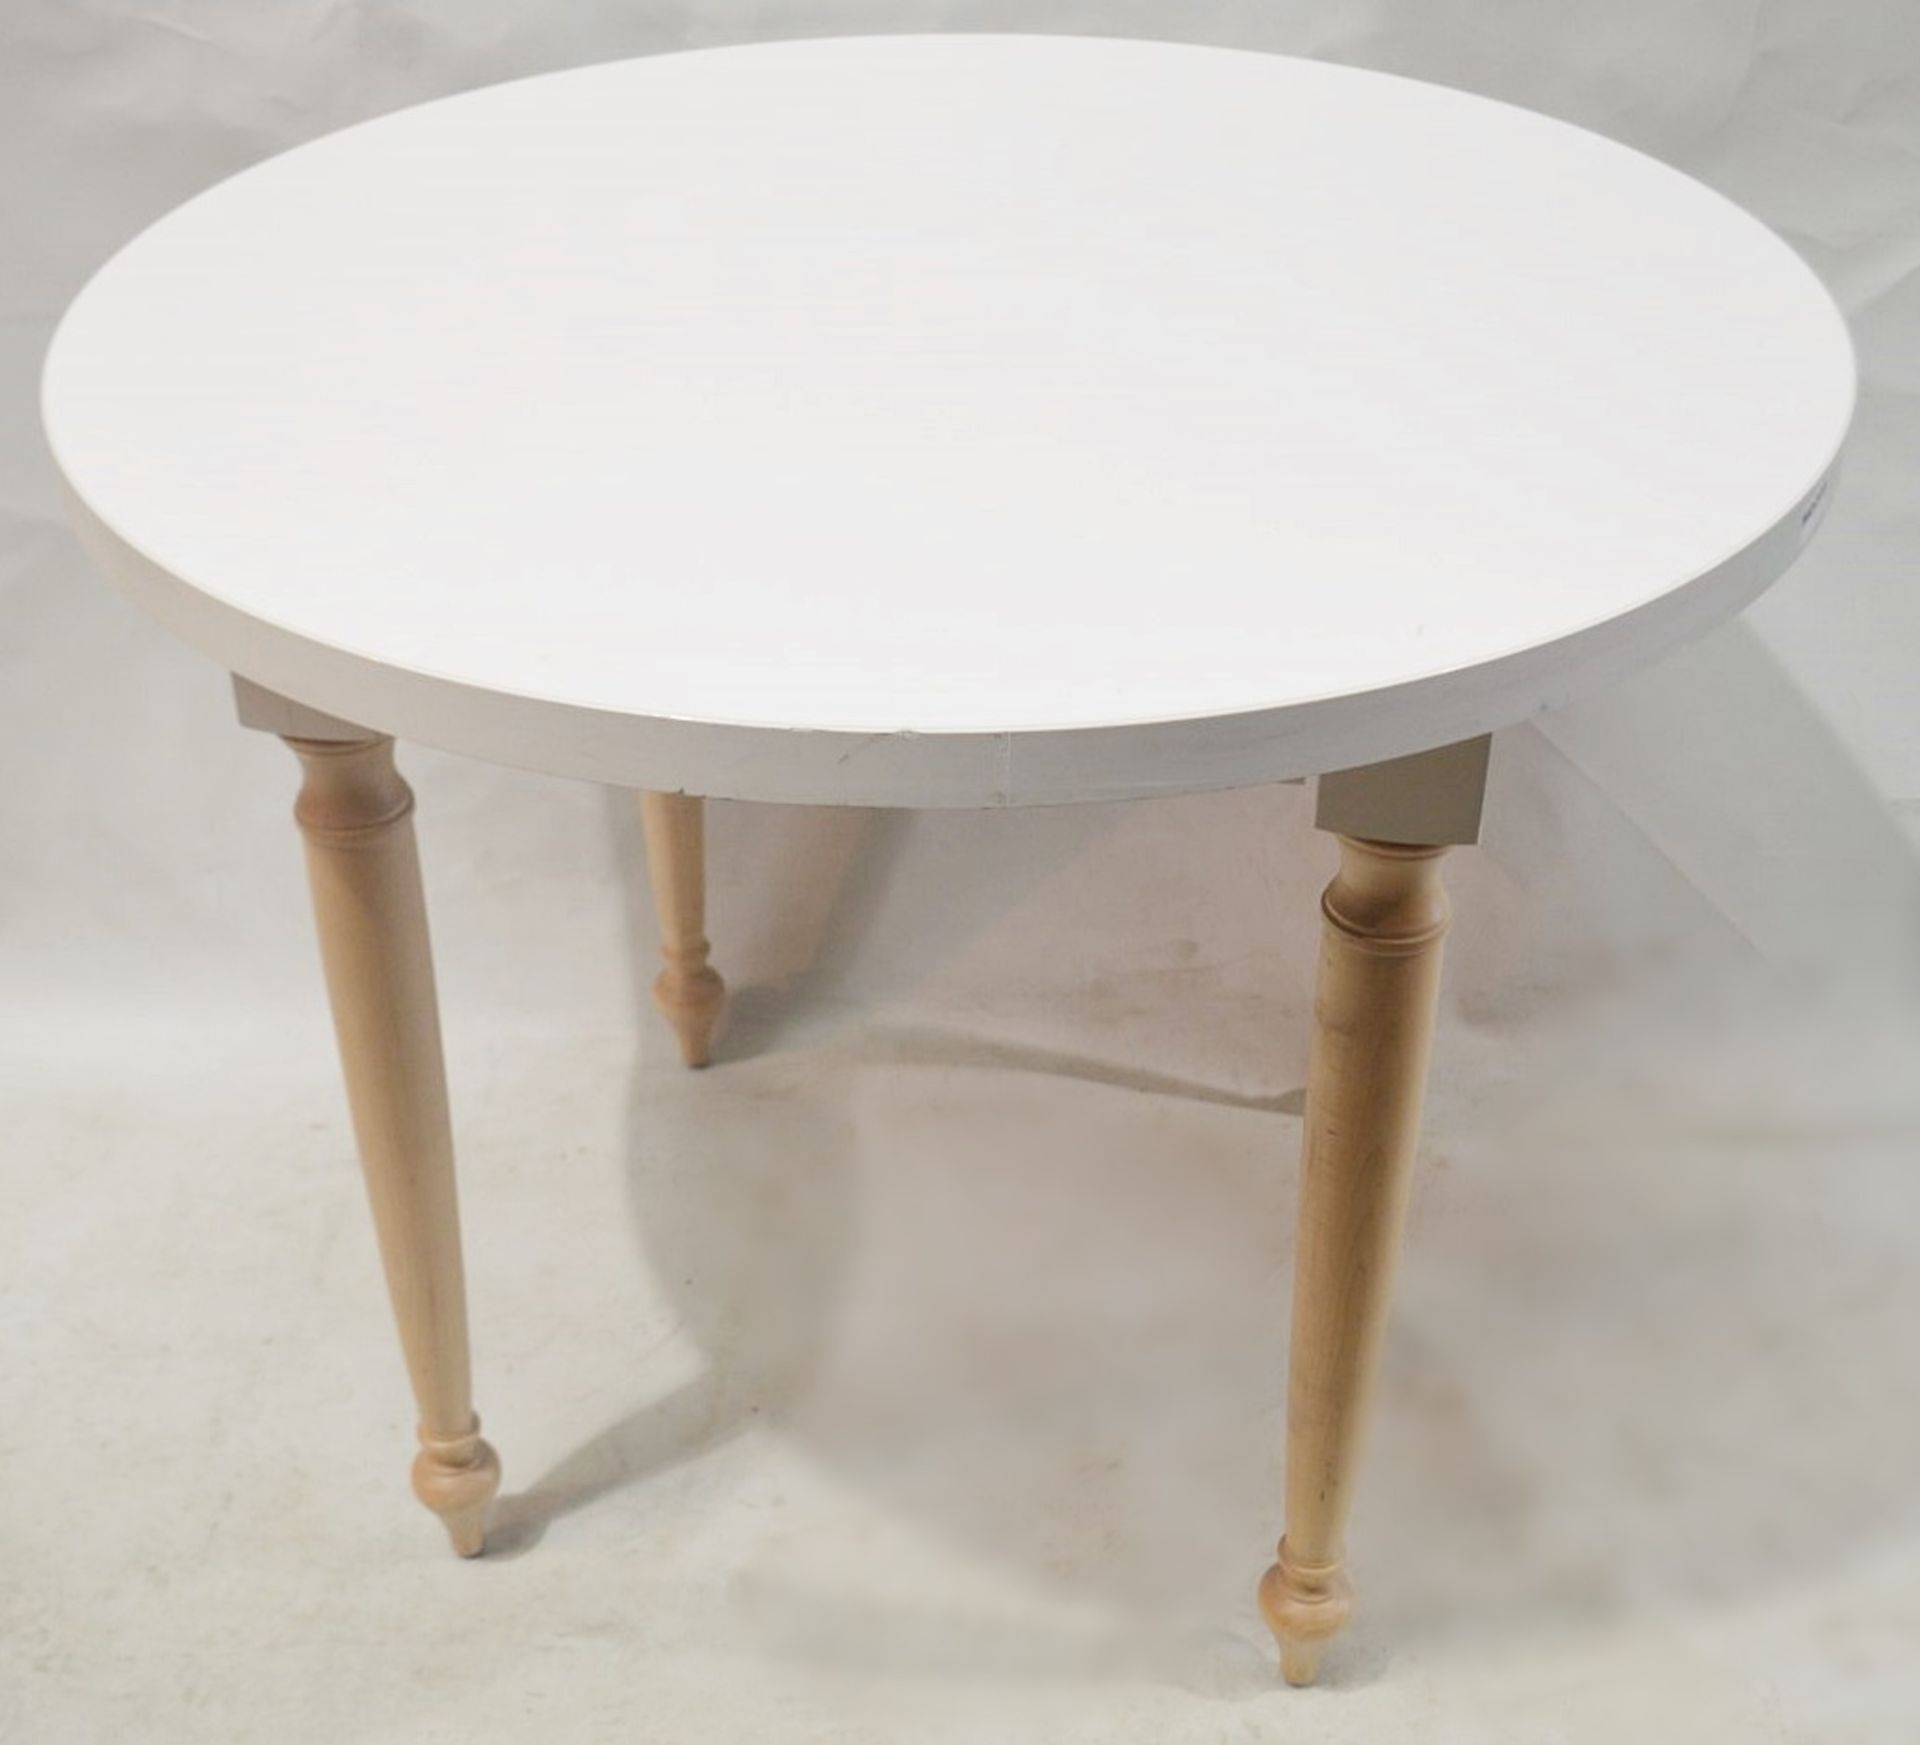 3 x Round Event Tables - Each Features Attractive Turned Legs In Beech Wood - Ex-Display